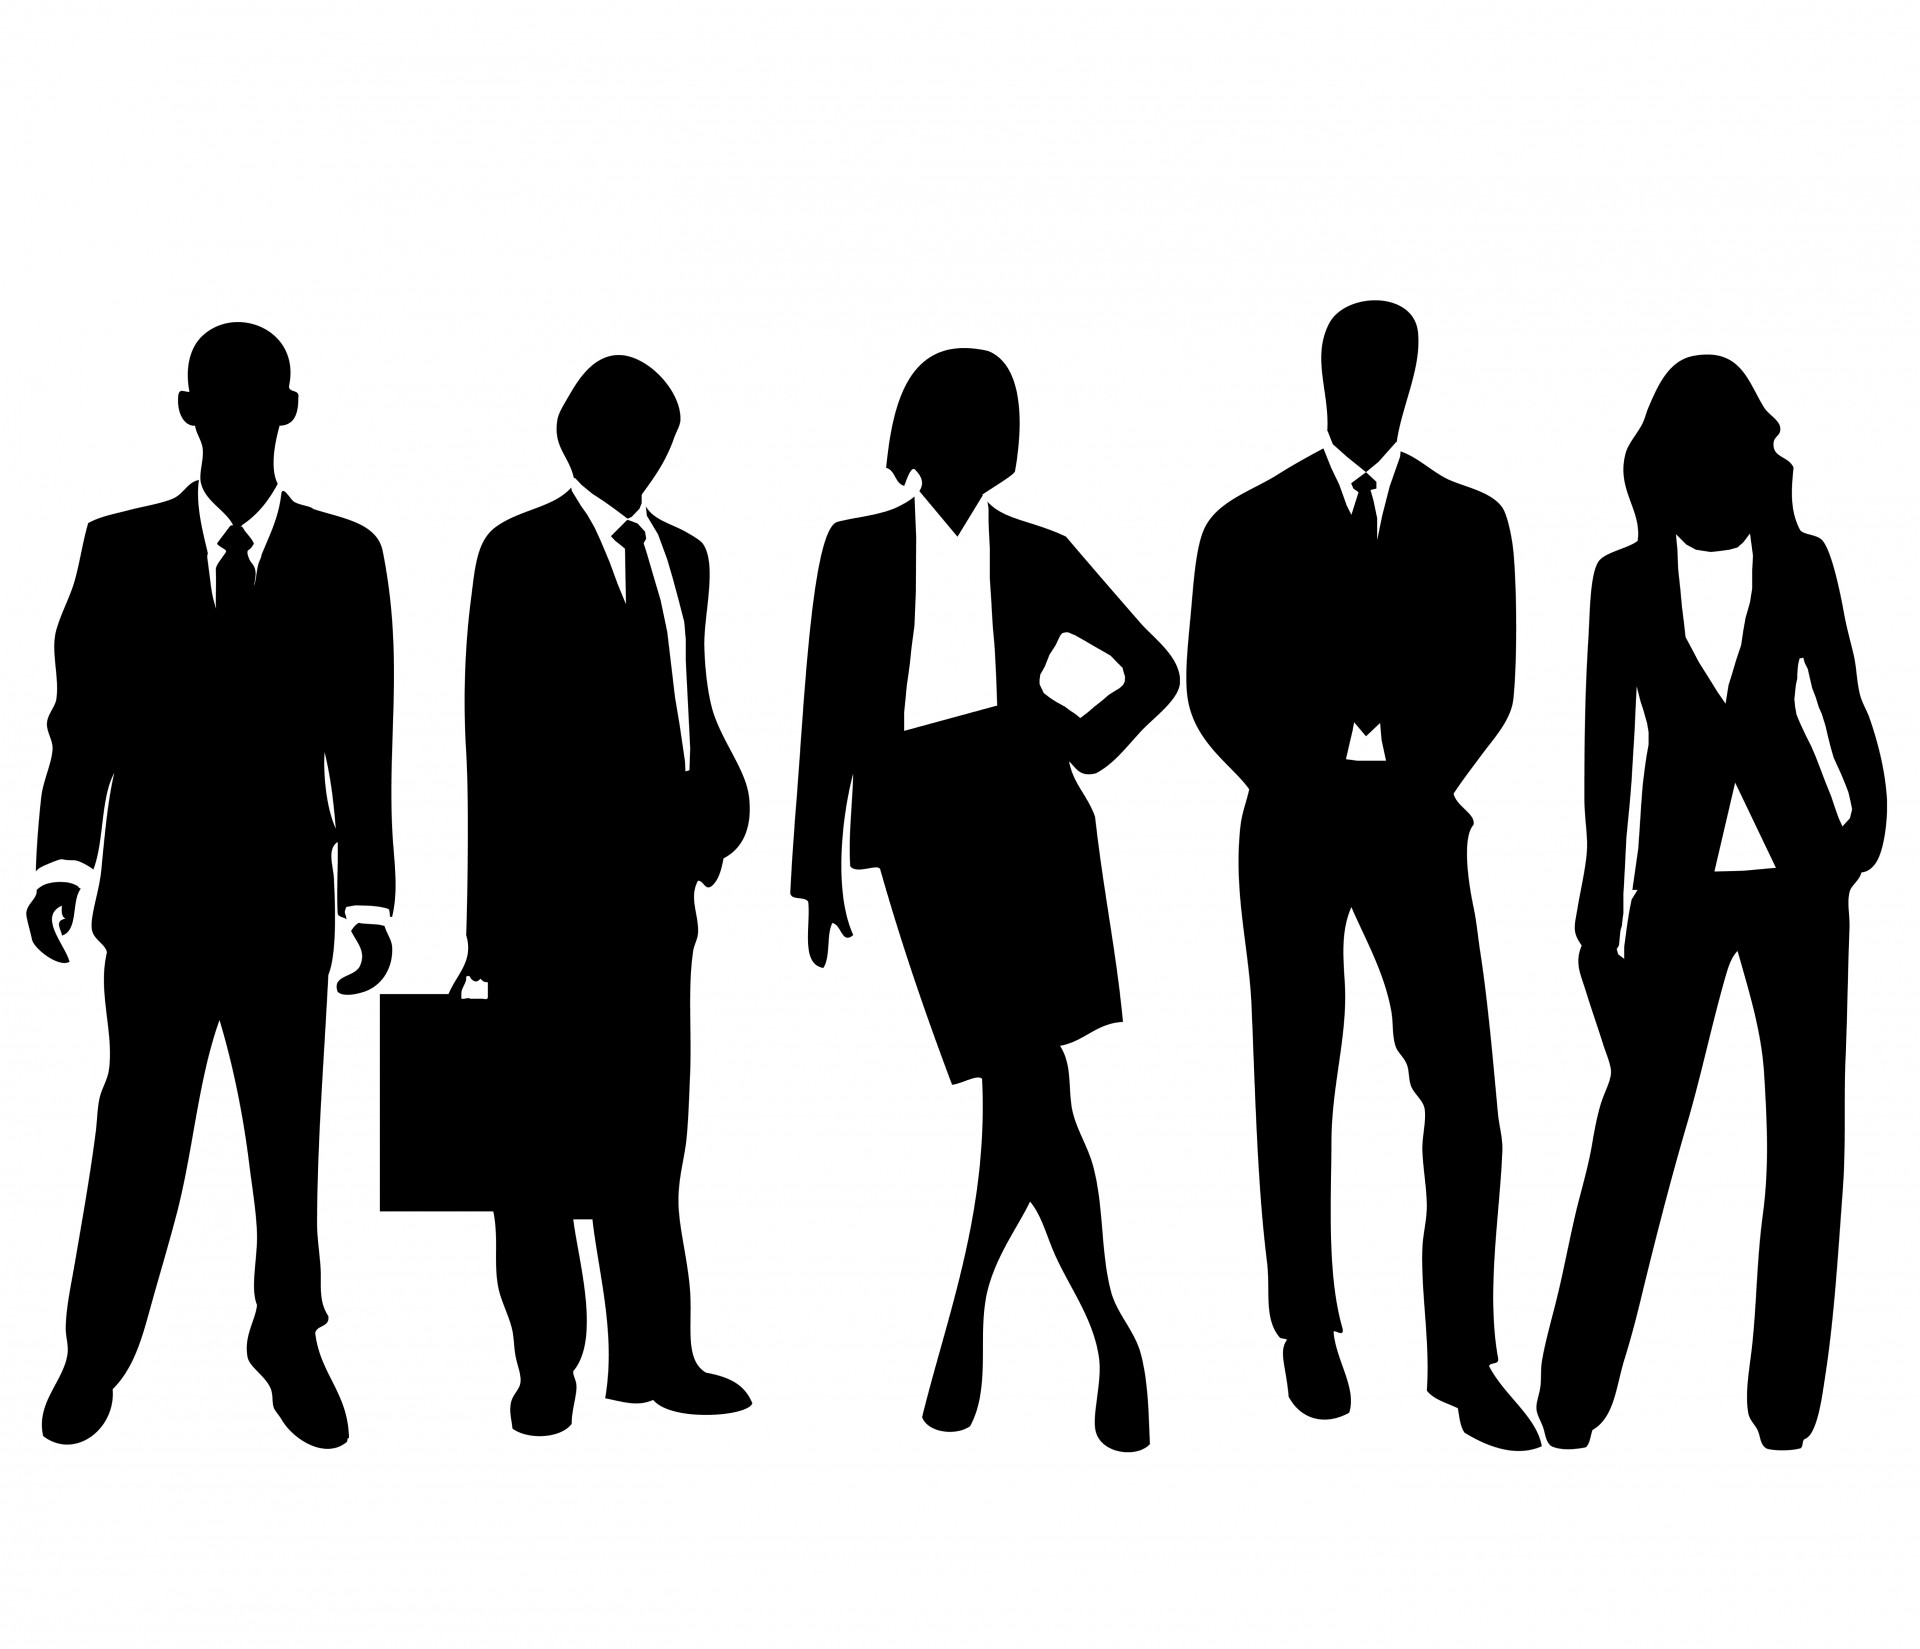 Business People Silhouette | Clipart Panda - Free Clipart Images